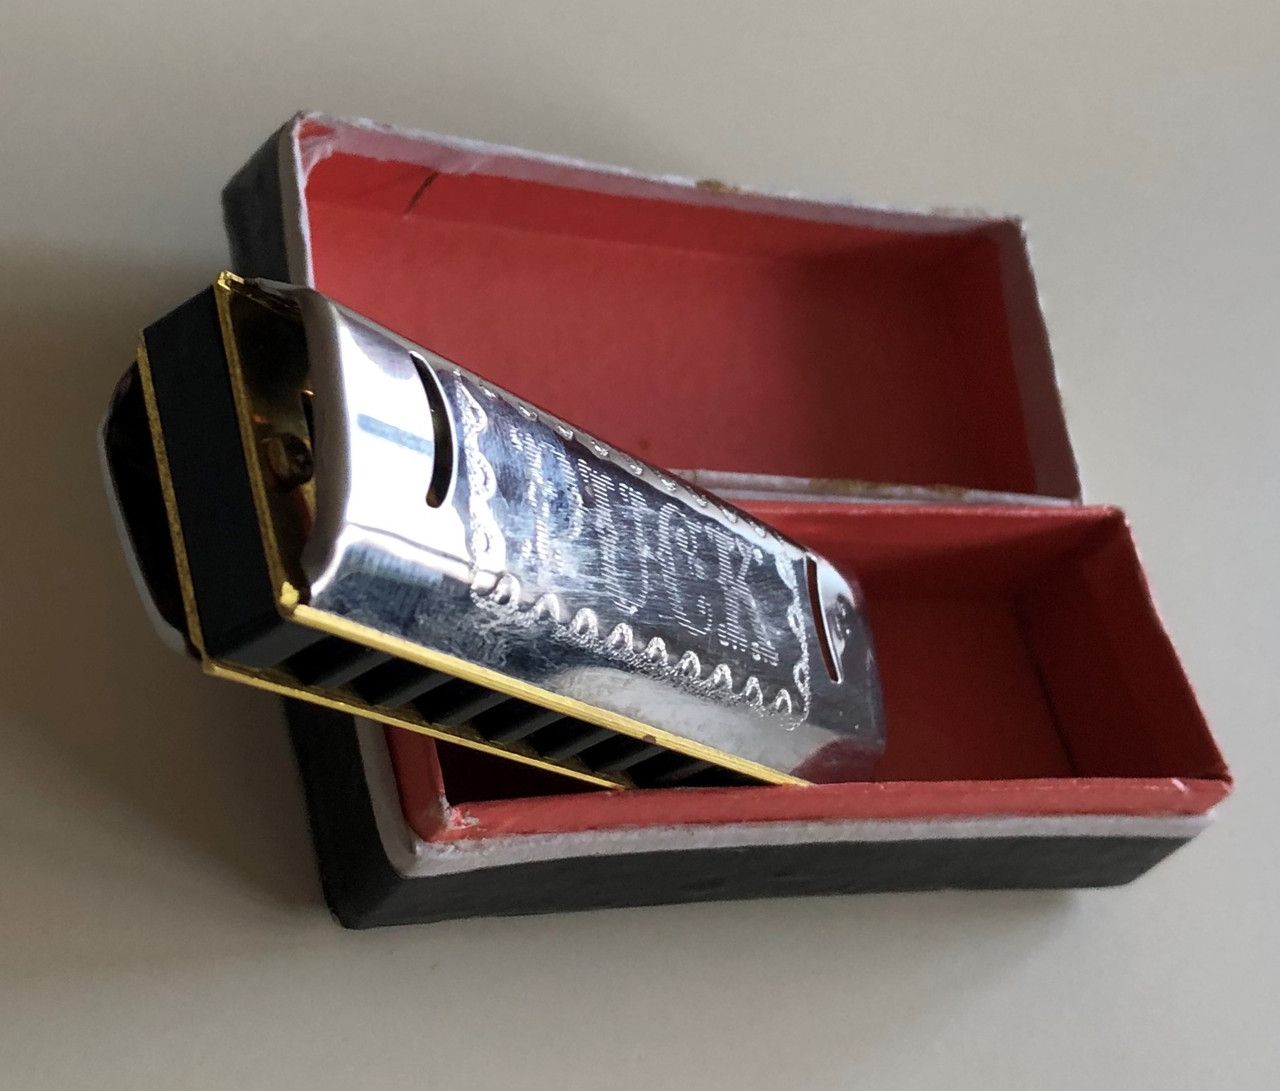 M. Hohner's Mini Historic Harmonica / Made in Germany / Hohner 550/20 C PUCK  - Key of C / Stainless steel cover, brass reed plates, plastic comb -  original box / Paris 1900 - Chicago 1893 - bibleinmylanguage